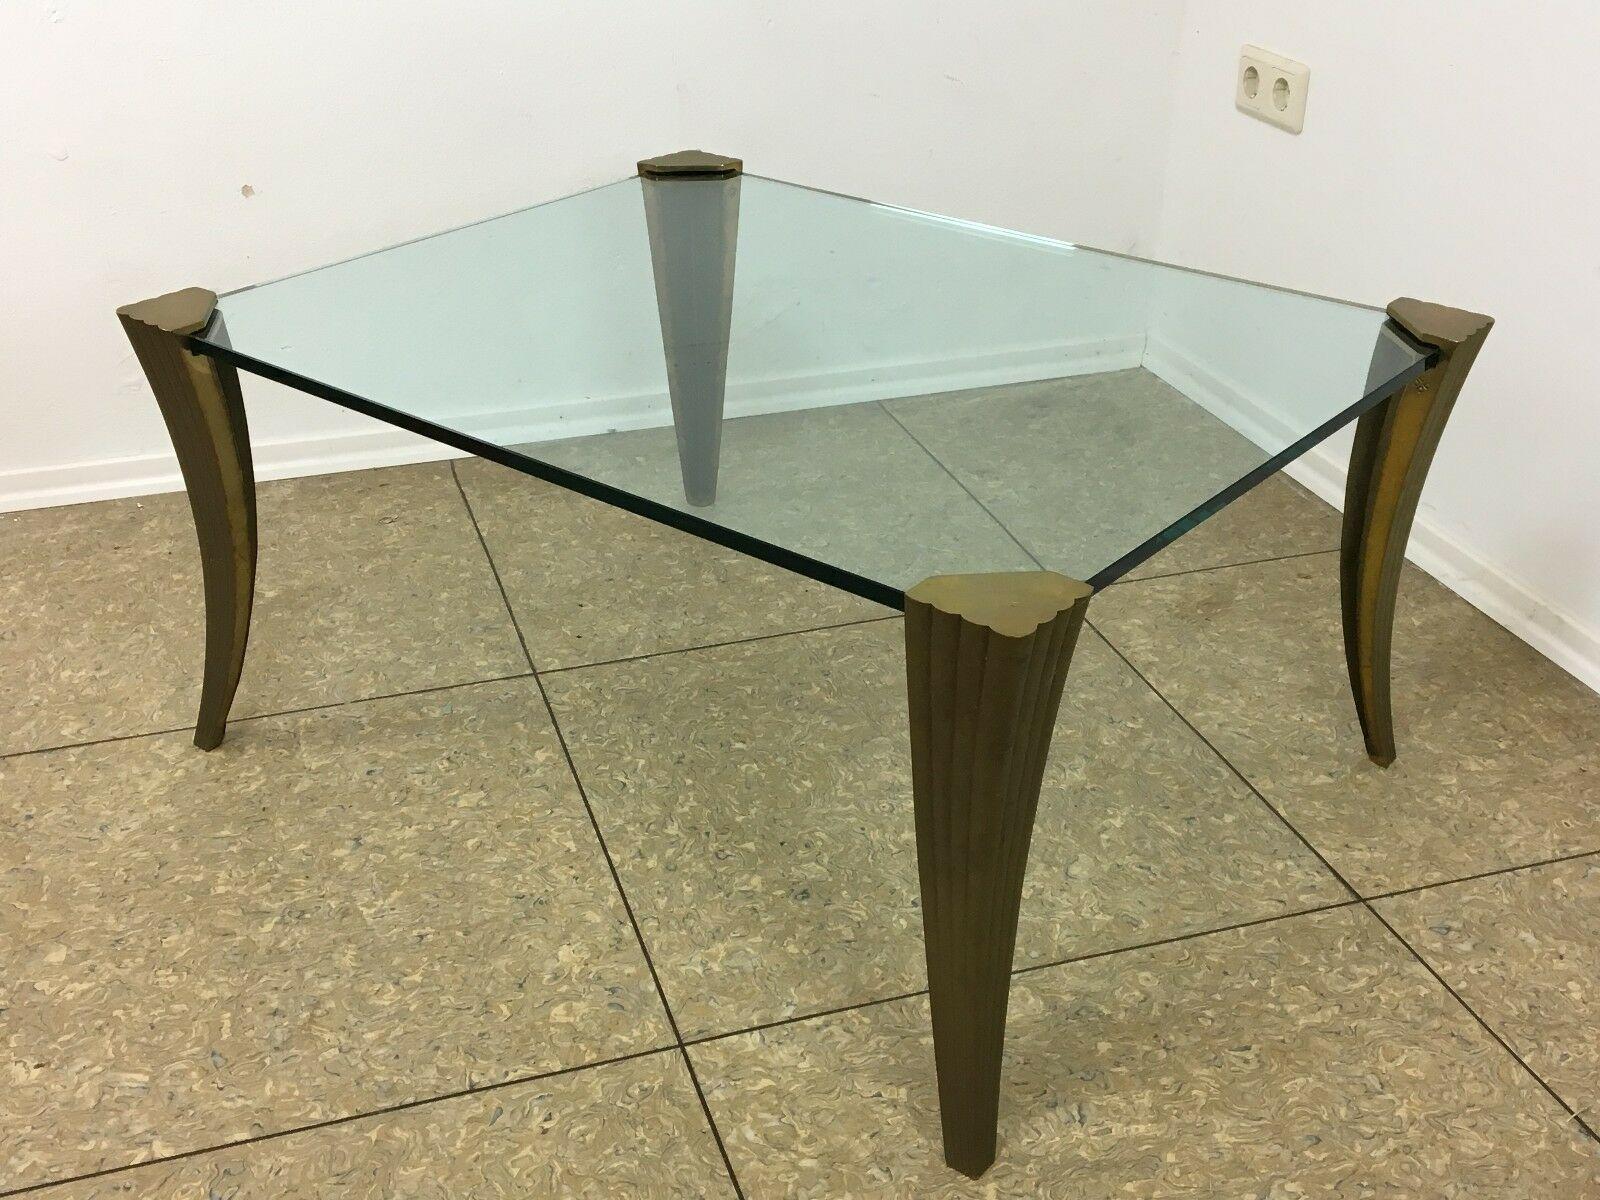 60s 70s brutalist bronze coffee table Space Age Design 70s

Object: coffee table

Manufacturer:

Condition: good

Age: around 1960-1970

Dimensions:

93.5cm x 74cm x 44cm

Other notes:

The pictures serve as part of the